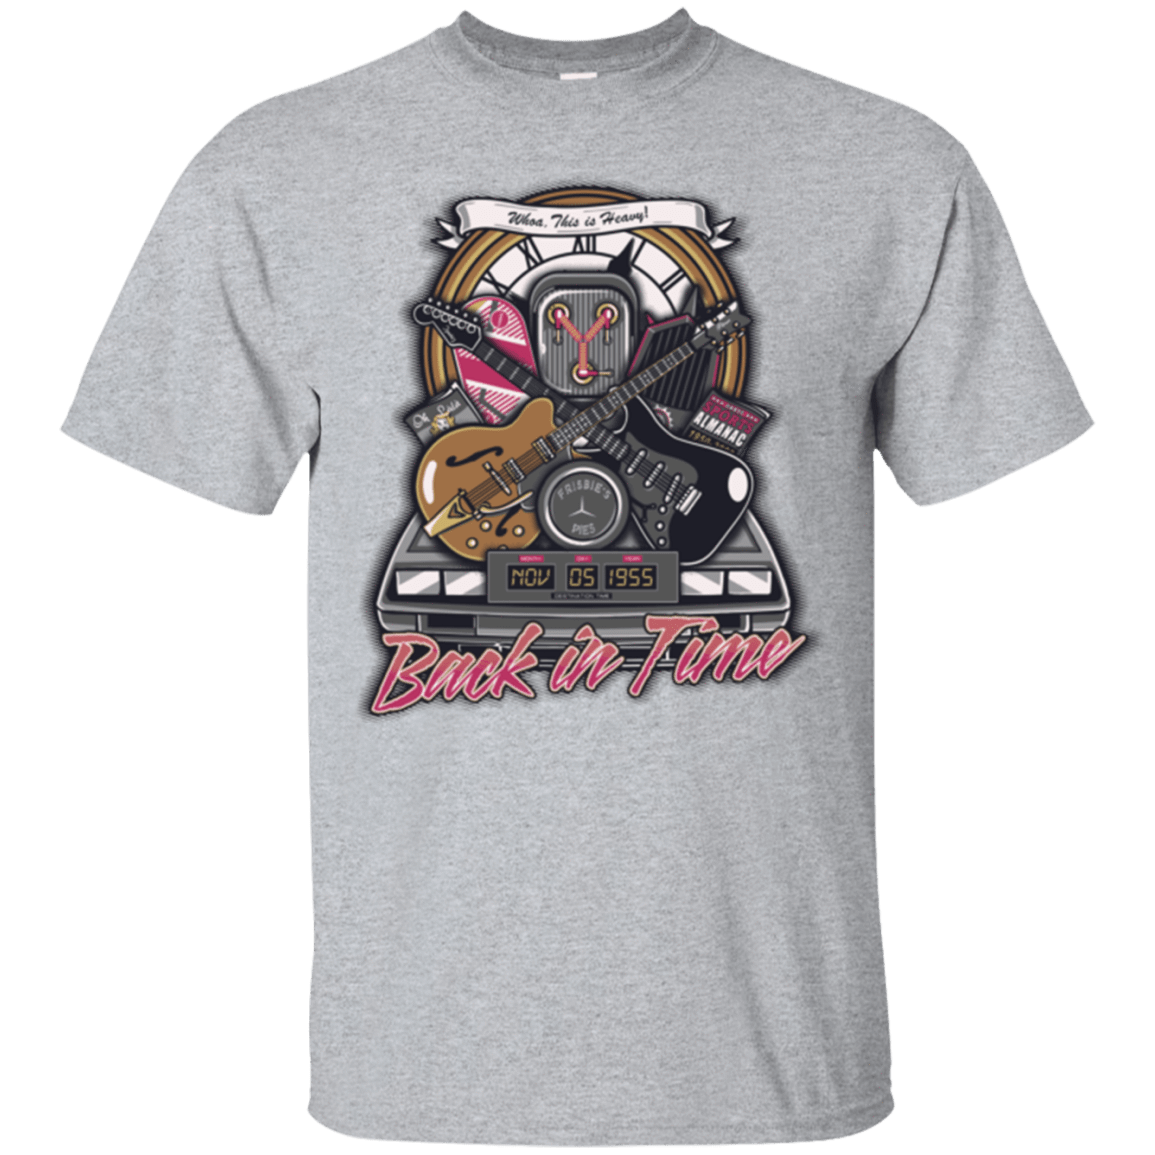 T-Shirts Sport Grey / Small Back in time T-Shirt